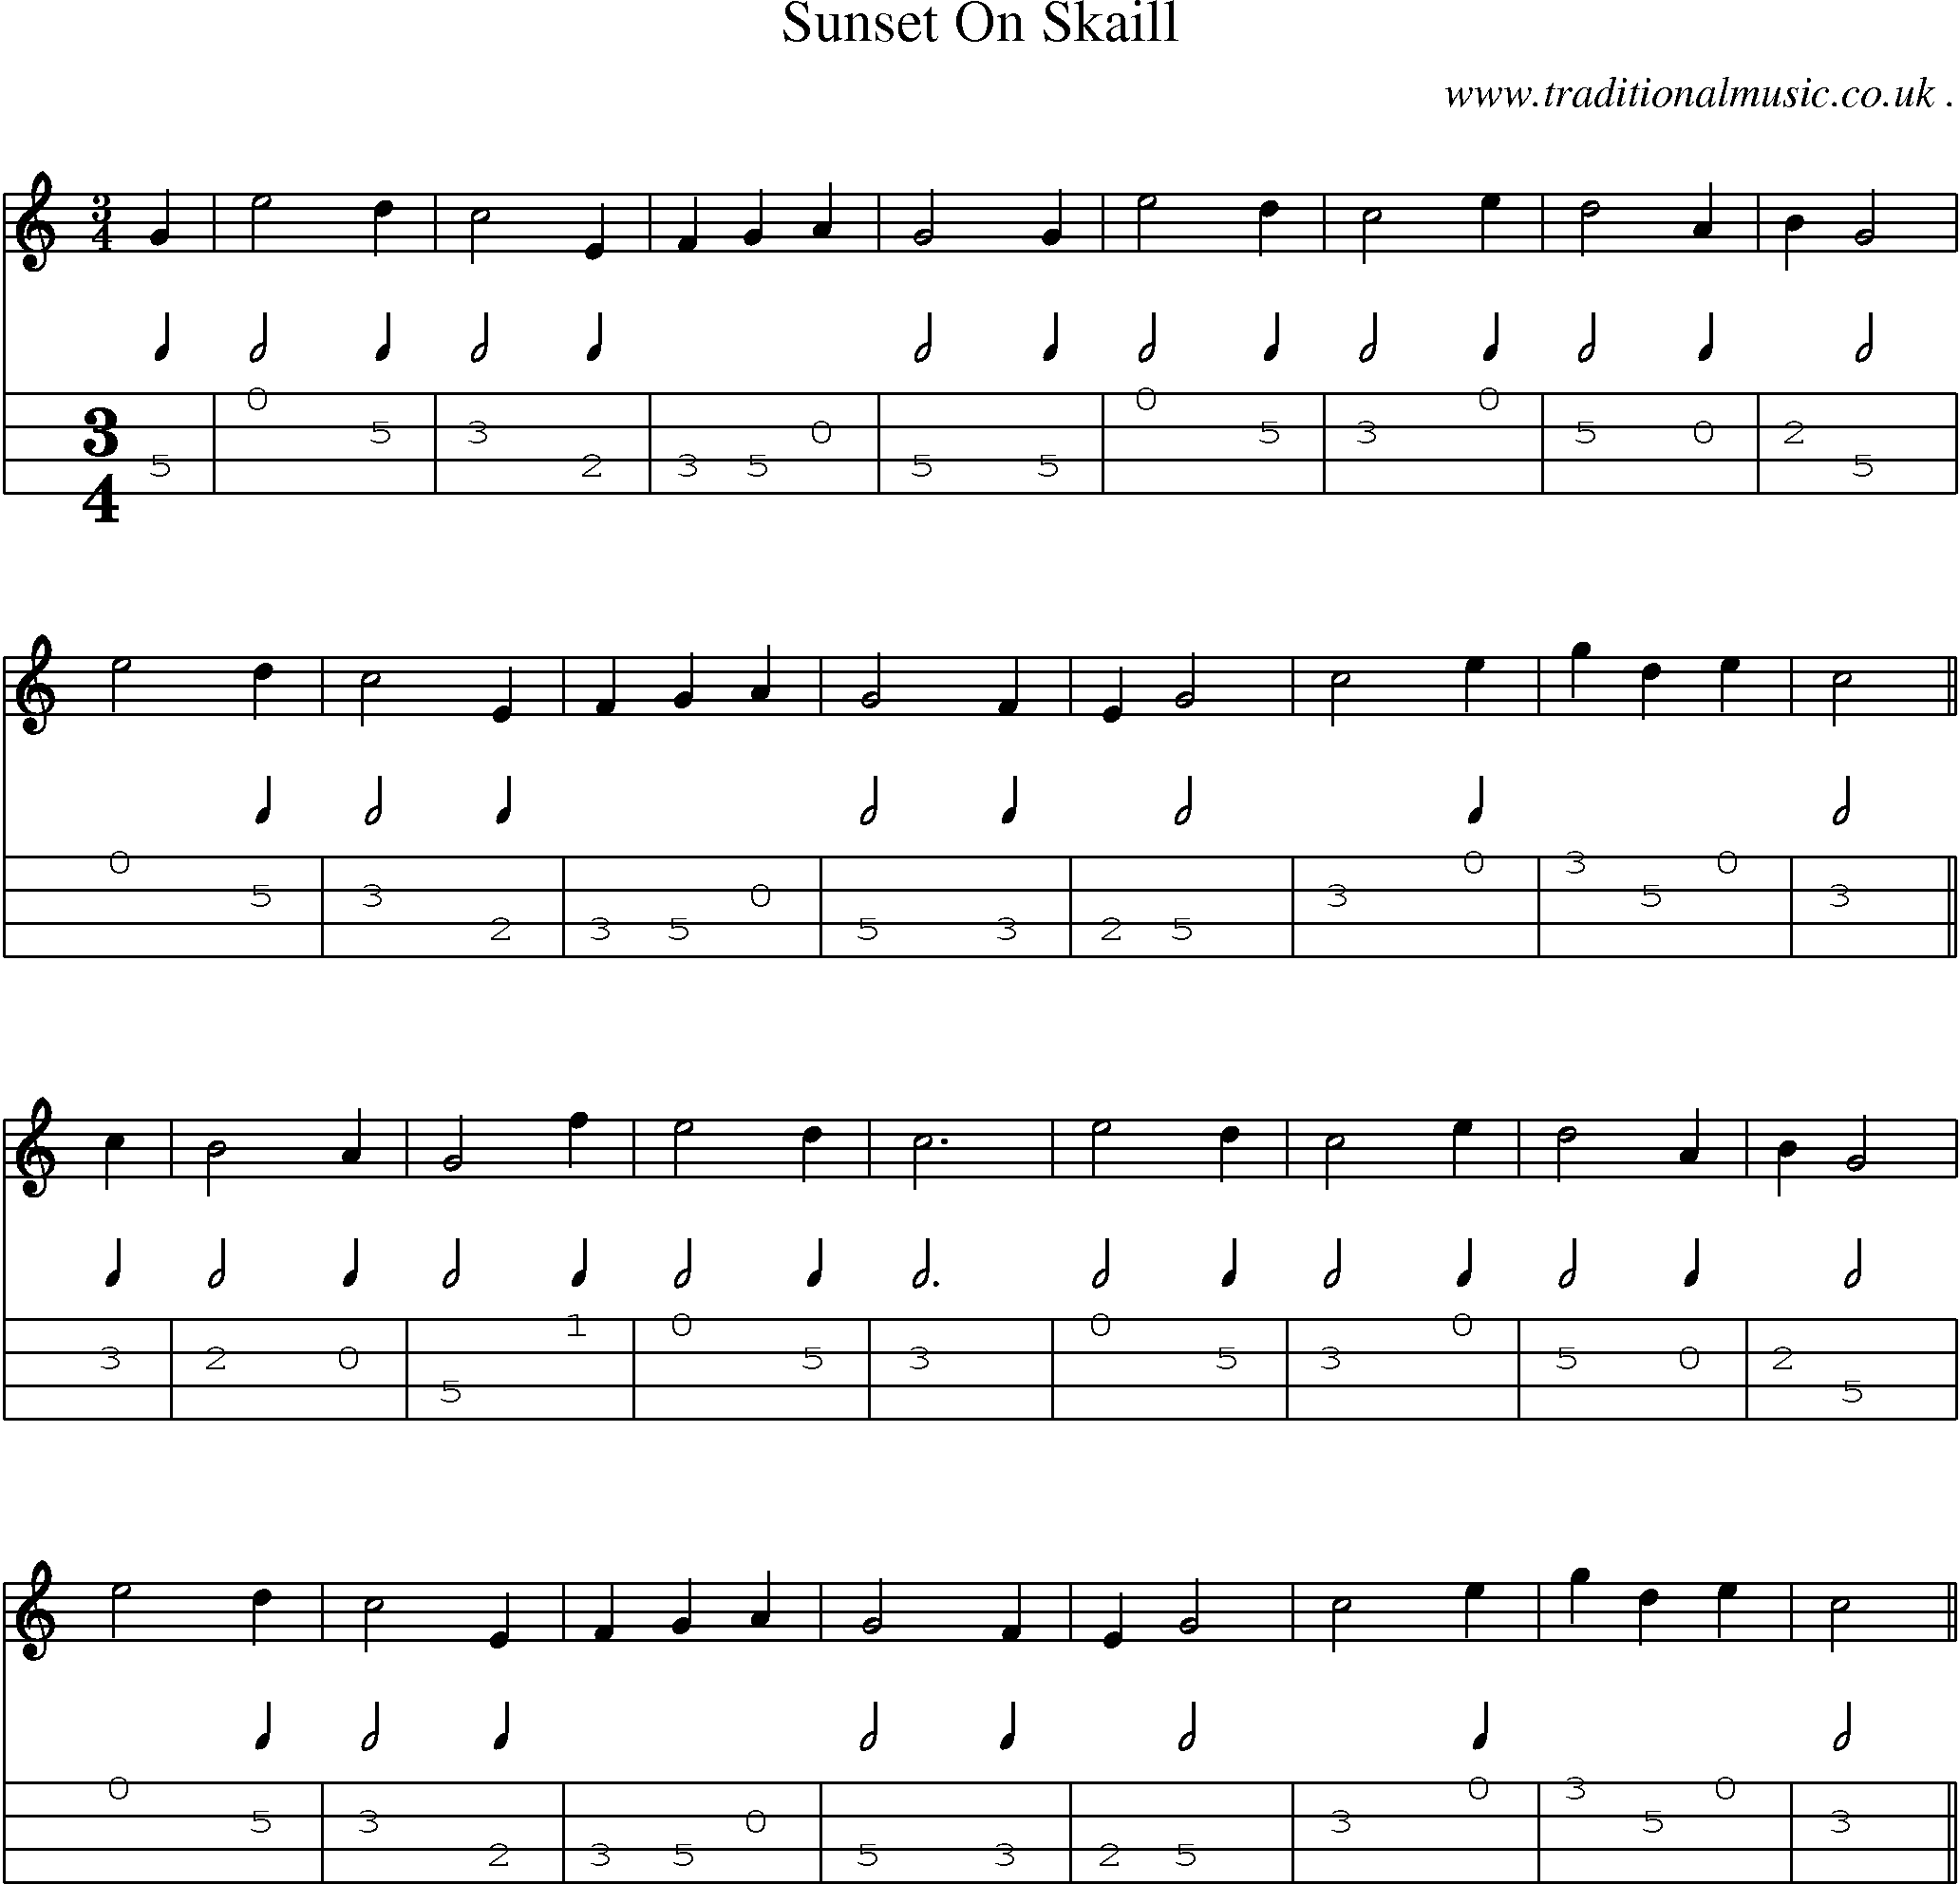 Sheet-music  score, Chords and Mandolin Tabs for Sunset On Skaill